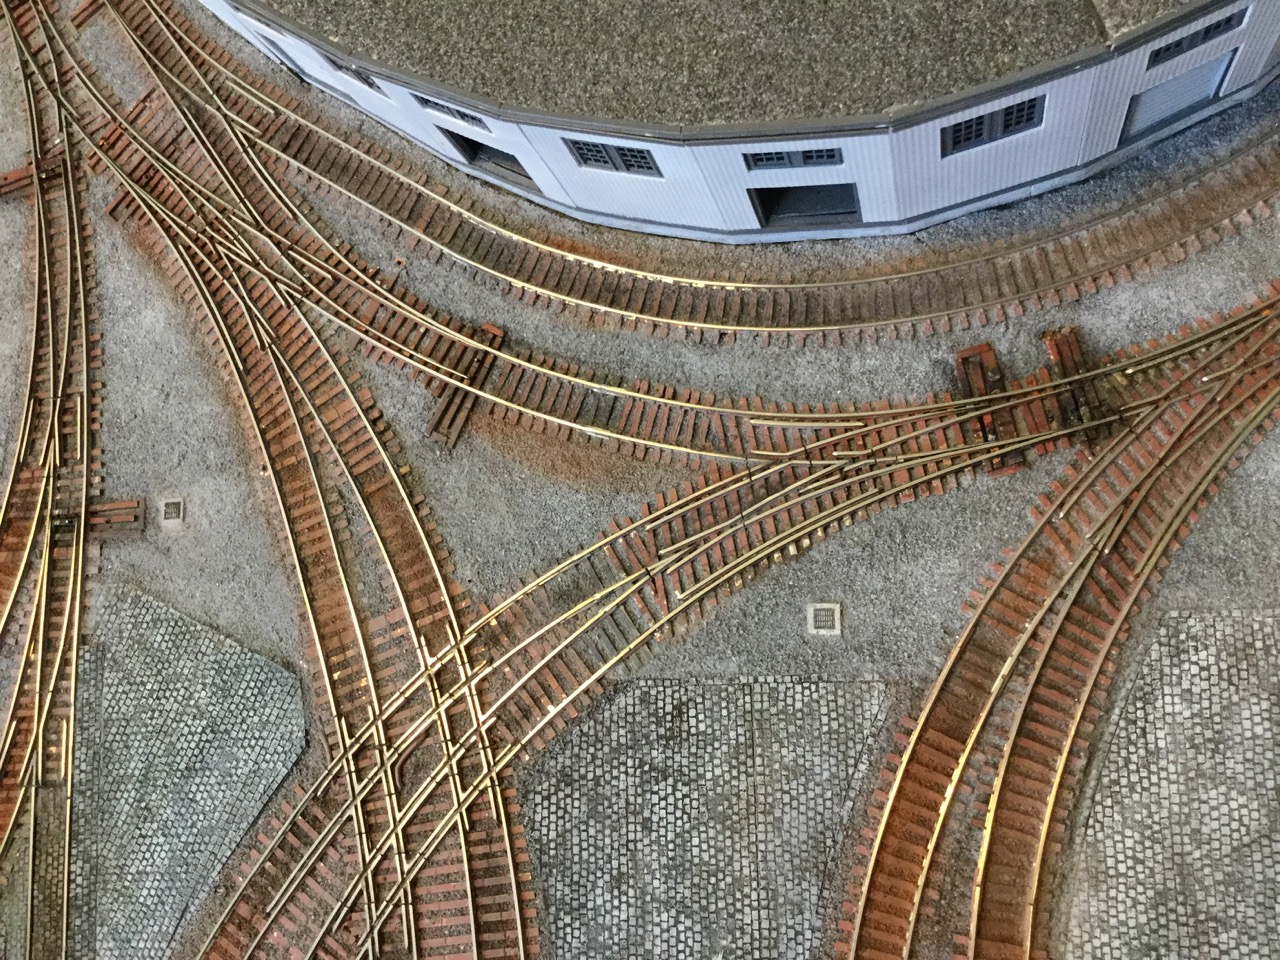 Ballasted tracks, turnouts and crossovers